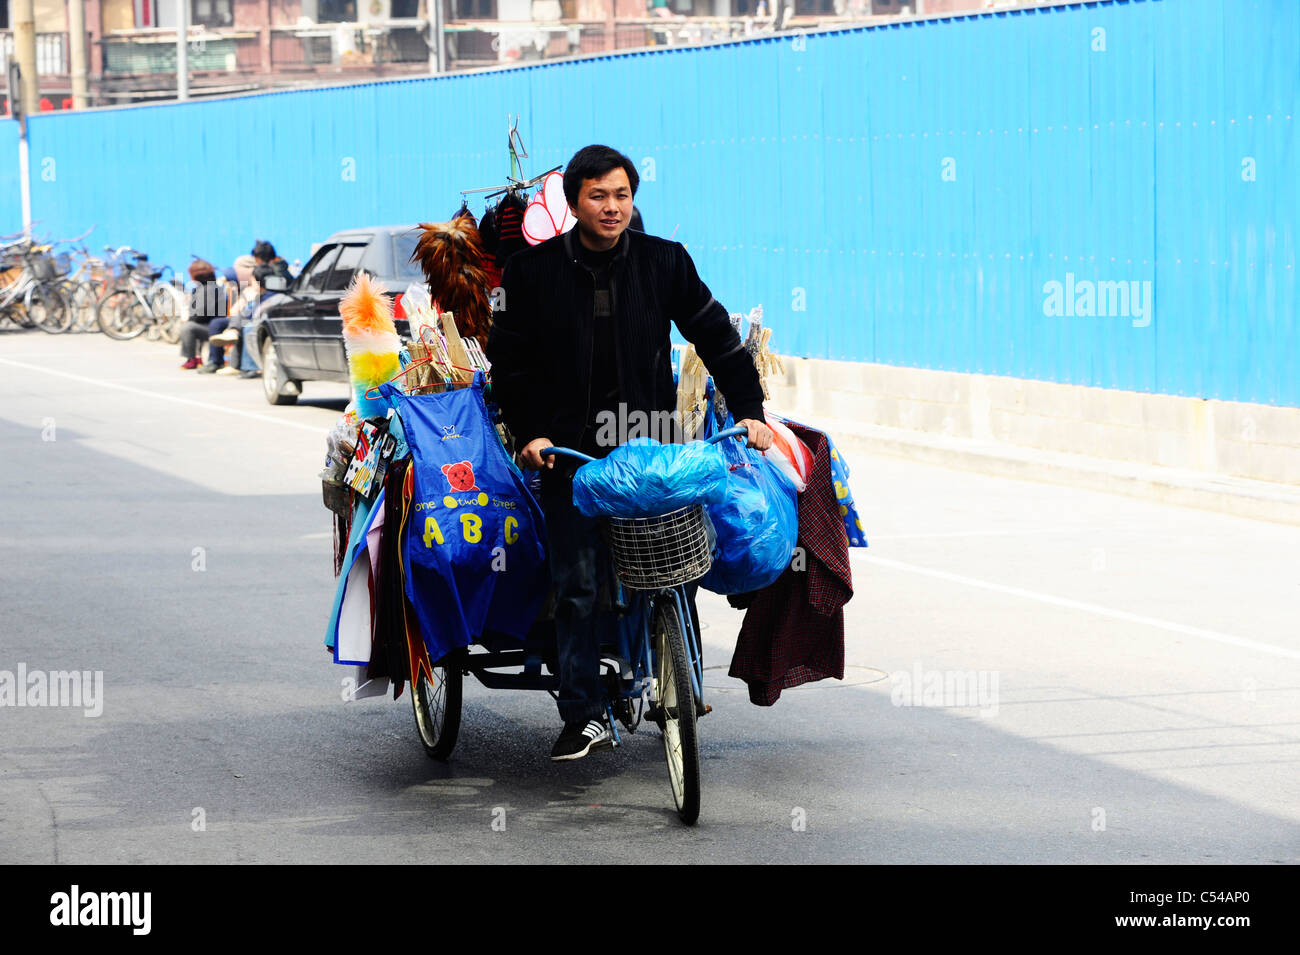 Chinese street trader on his bike in shanghai. Stock Photo